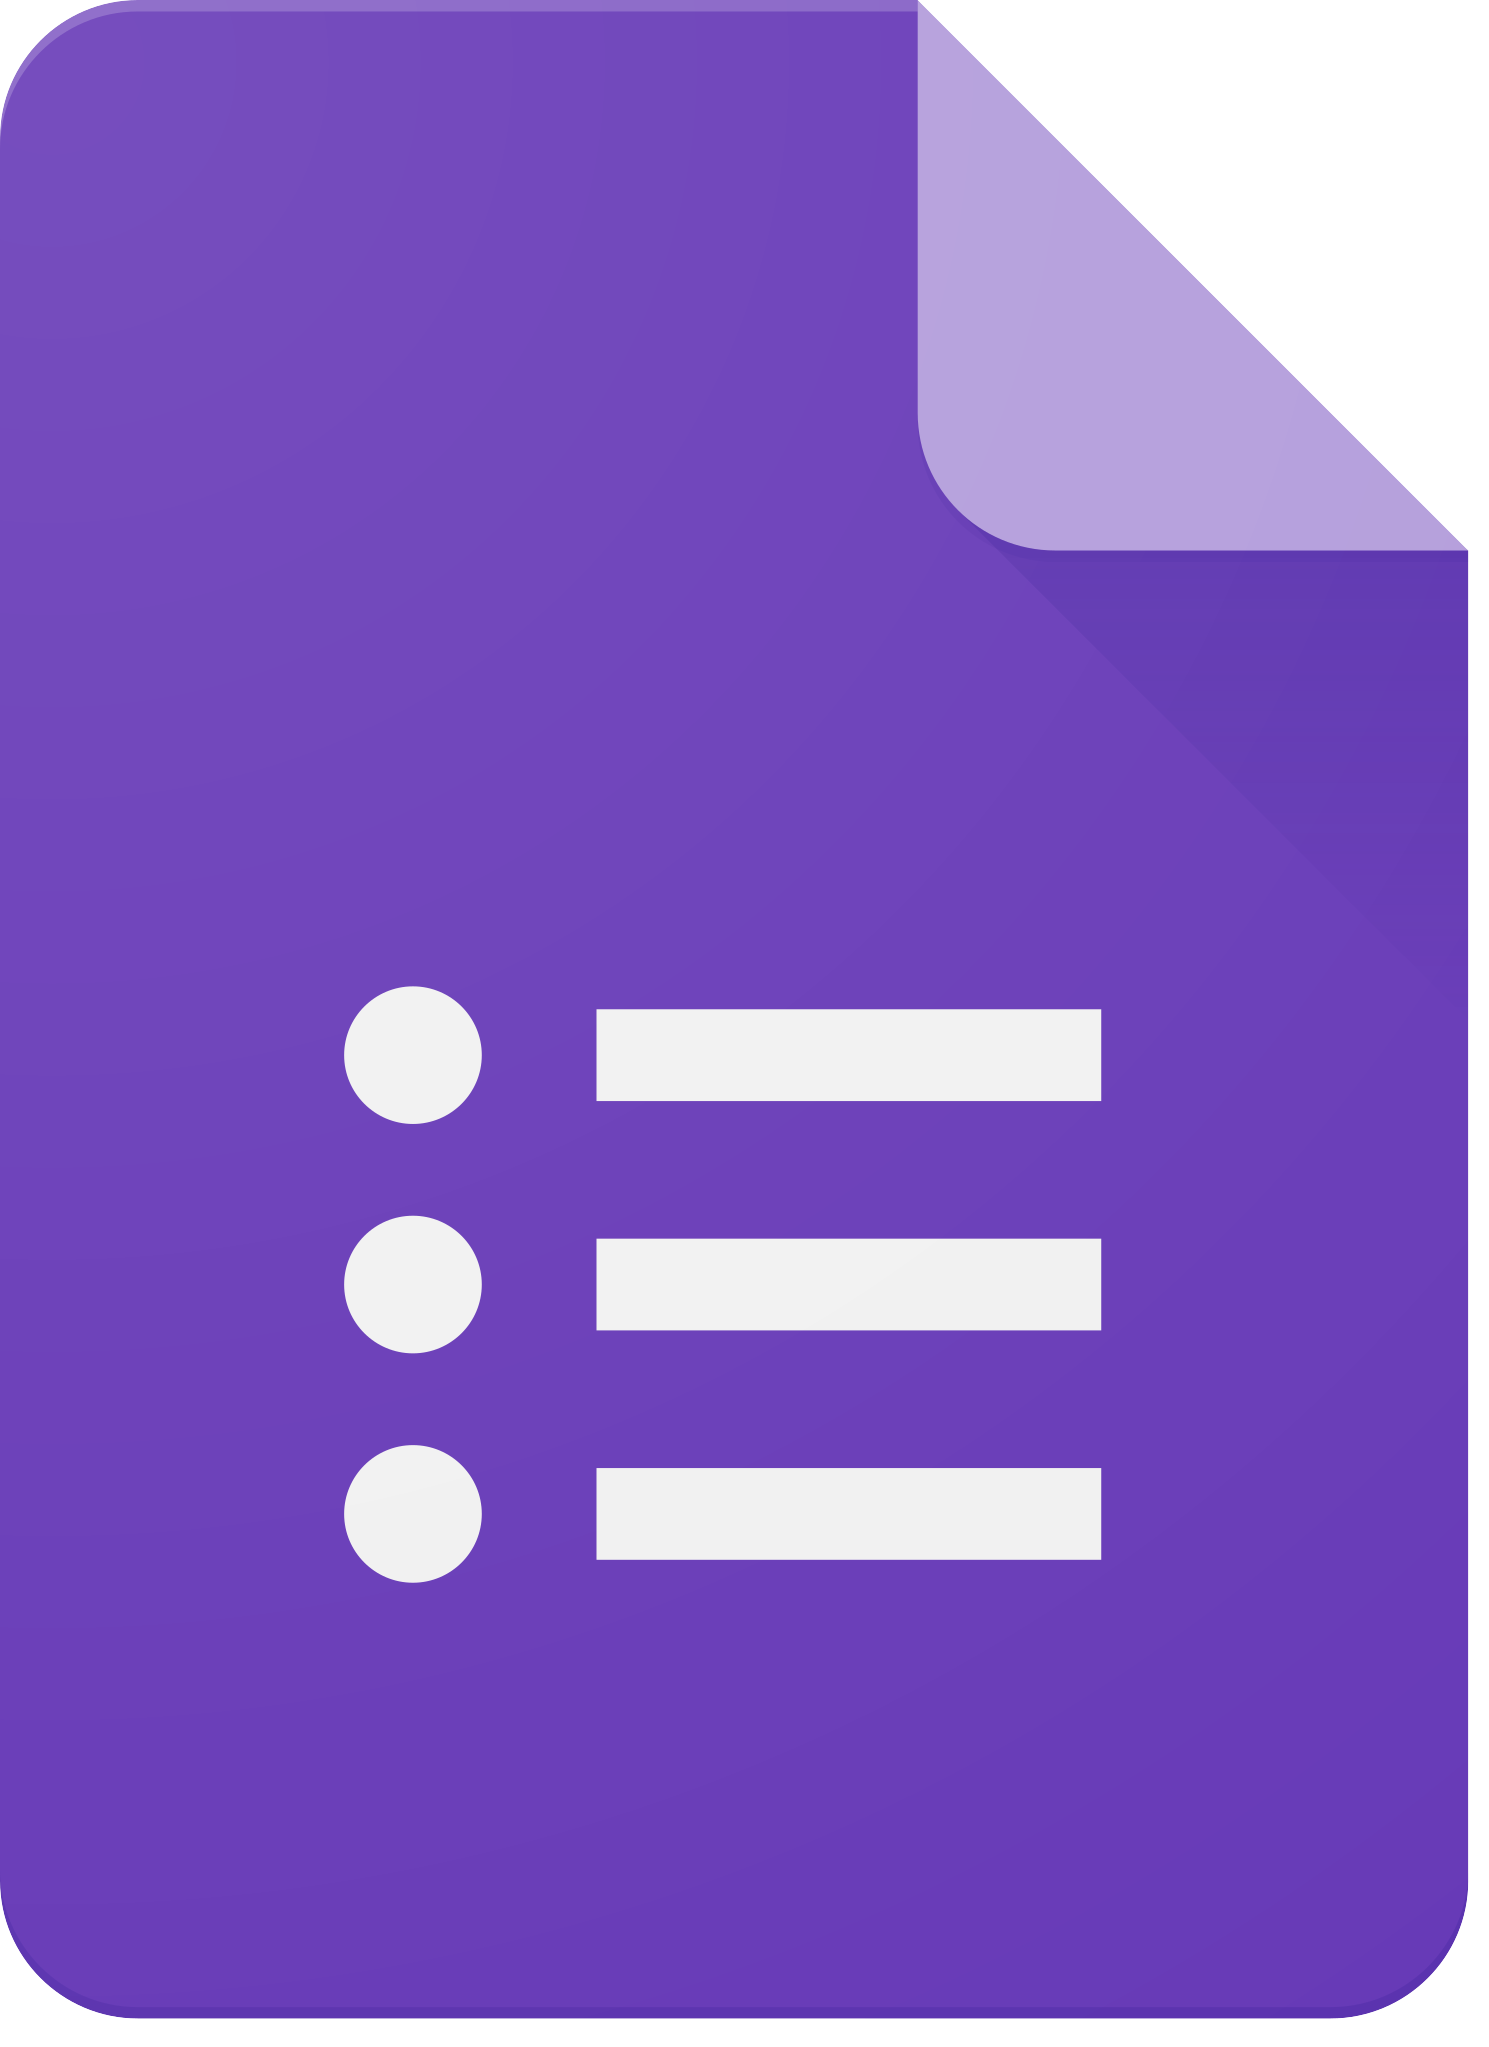 File:Google Forms logo (2014-2020).svg - Wikimedia Commons